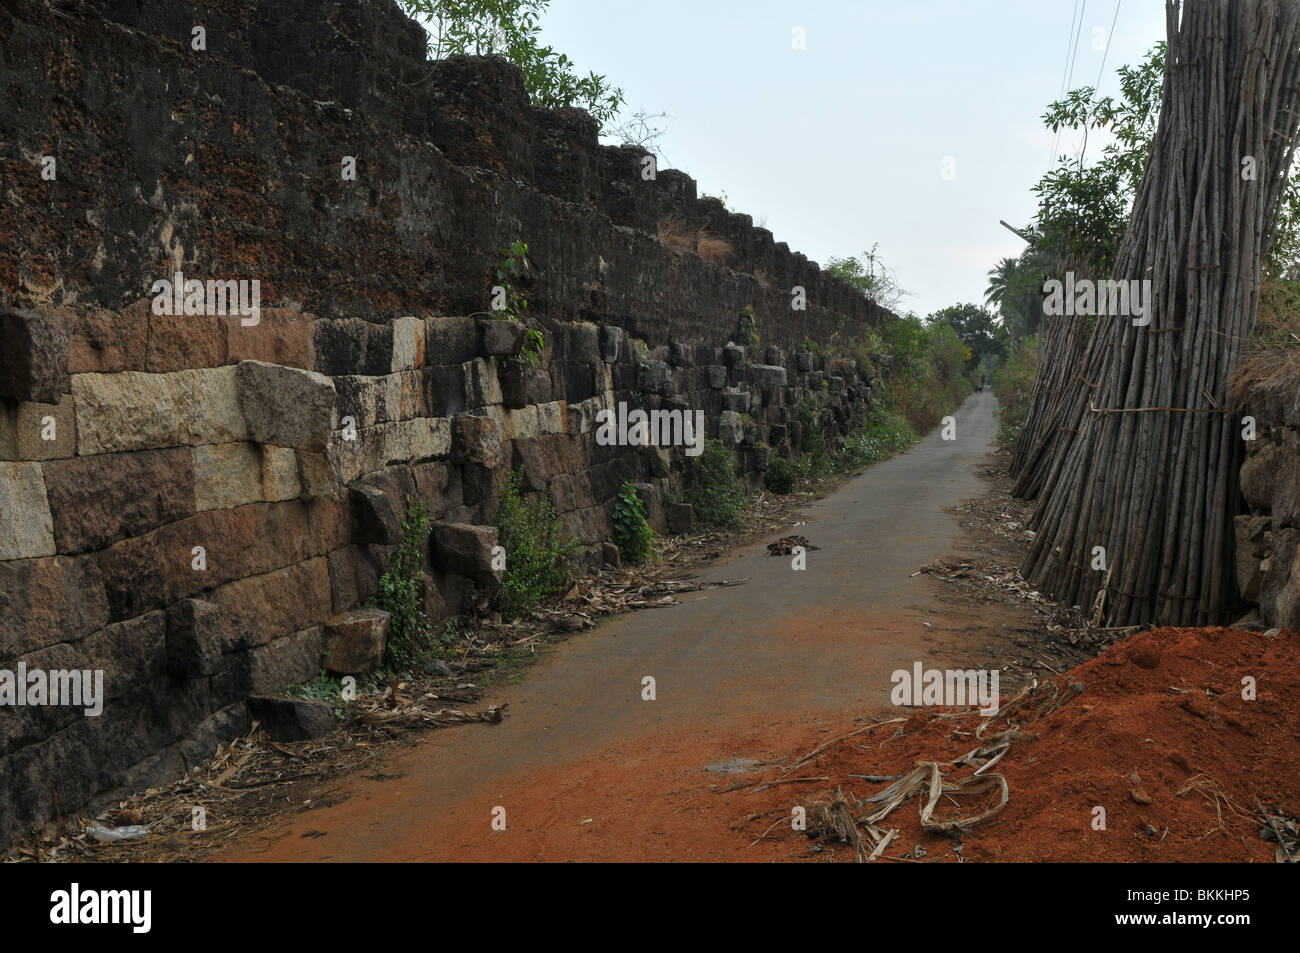 The walls of an ancient fort Stock Photo